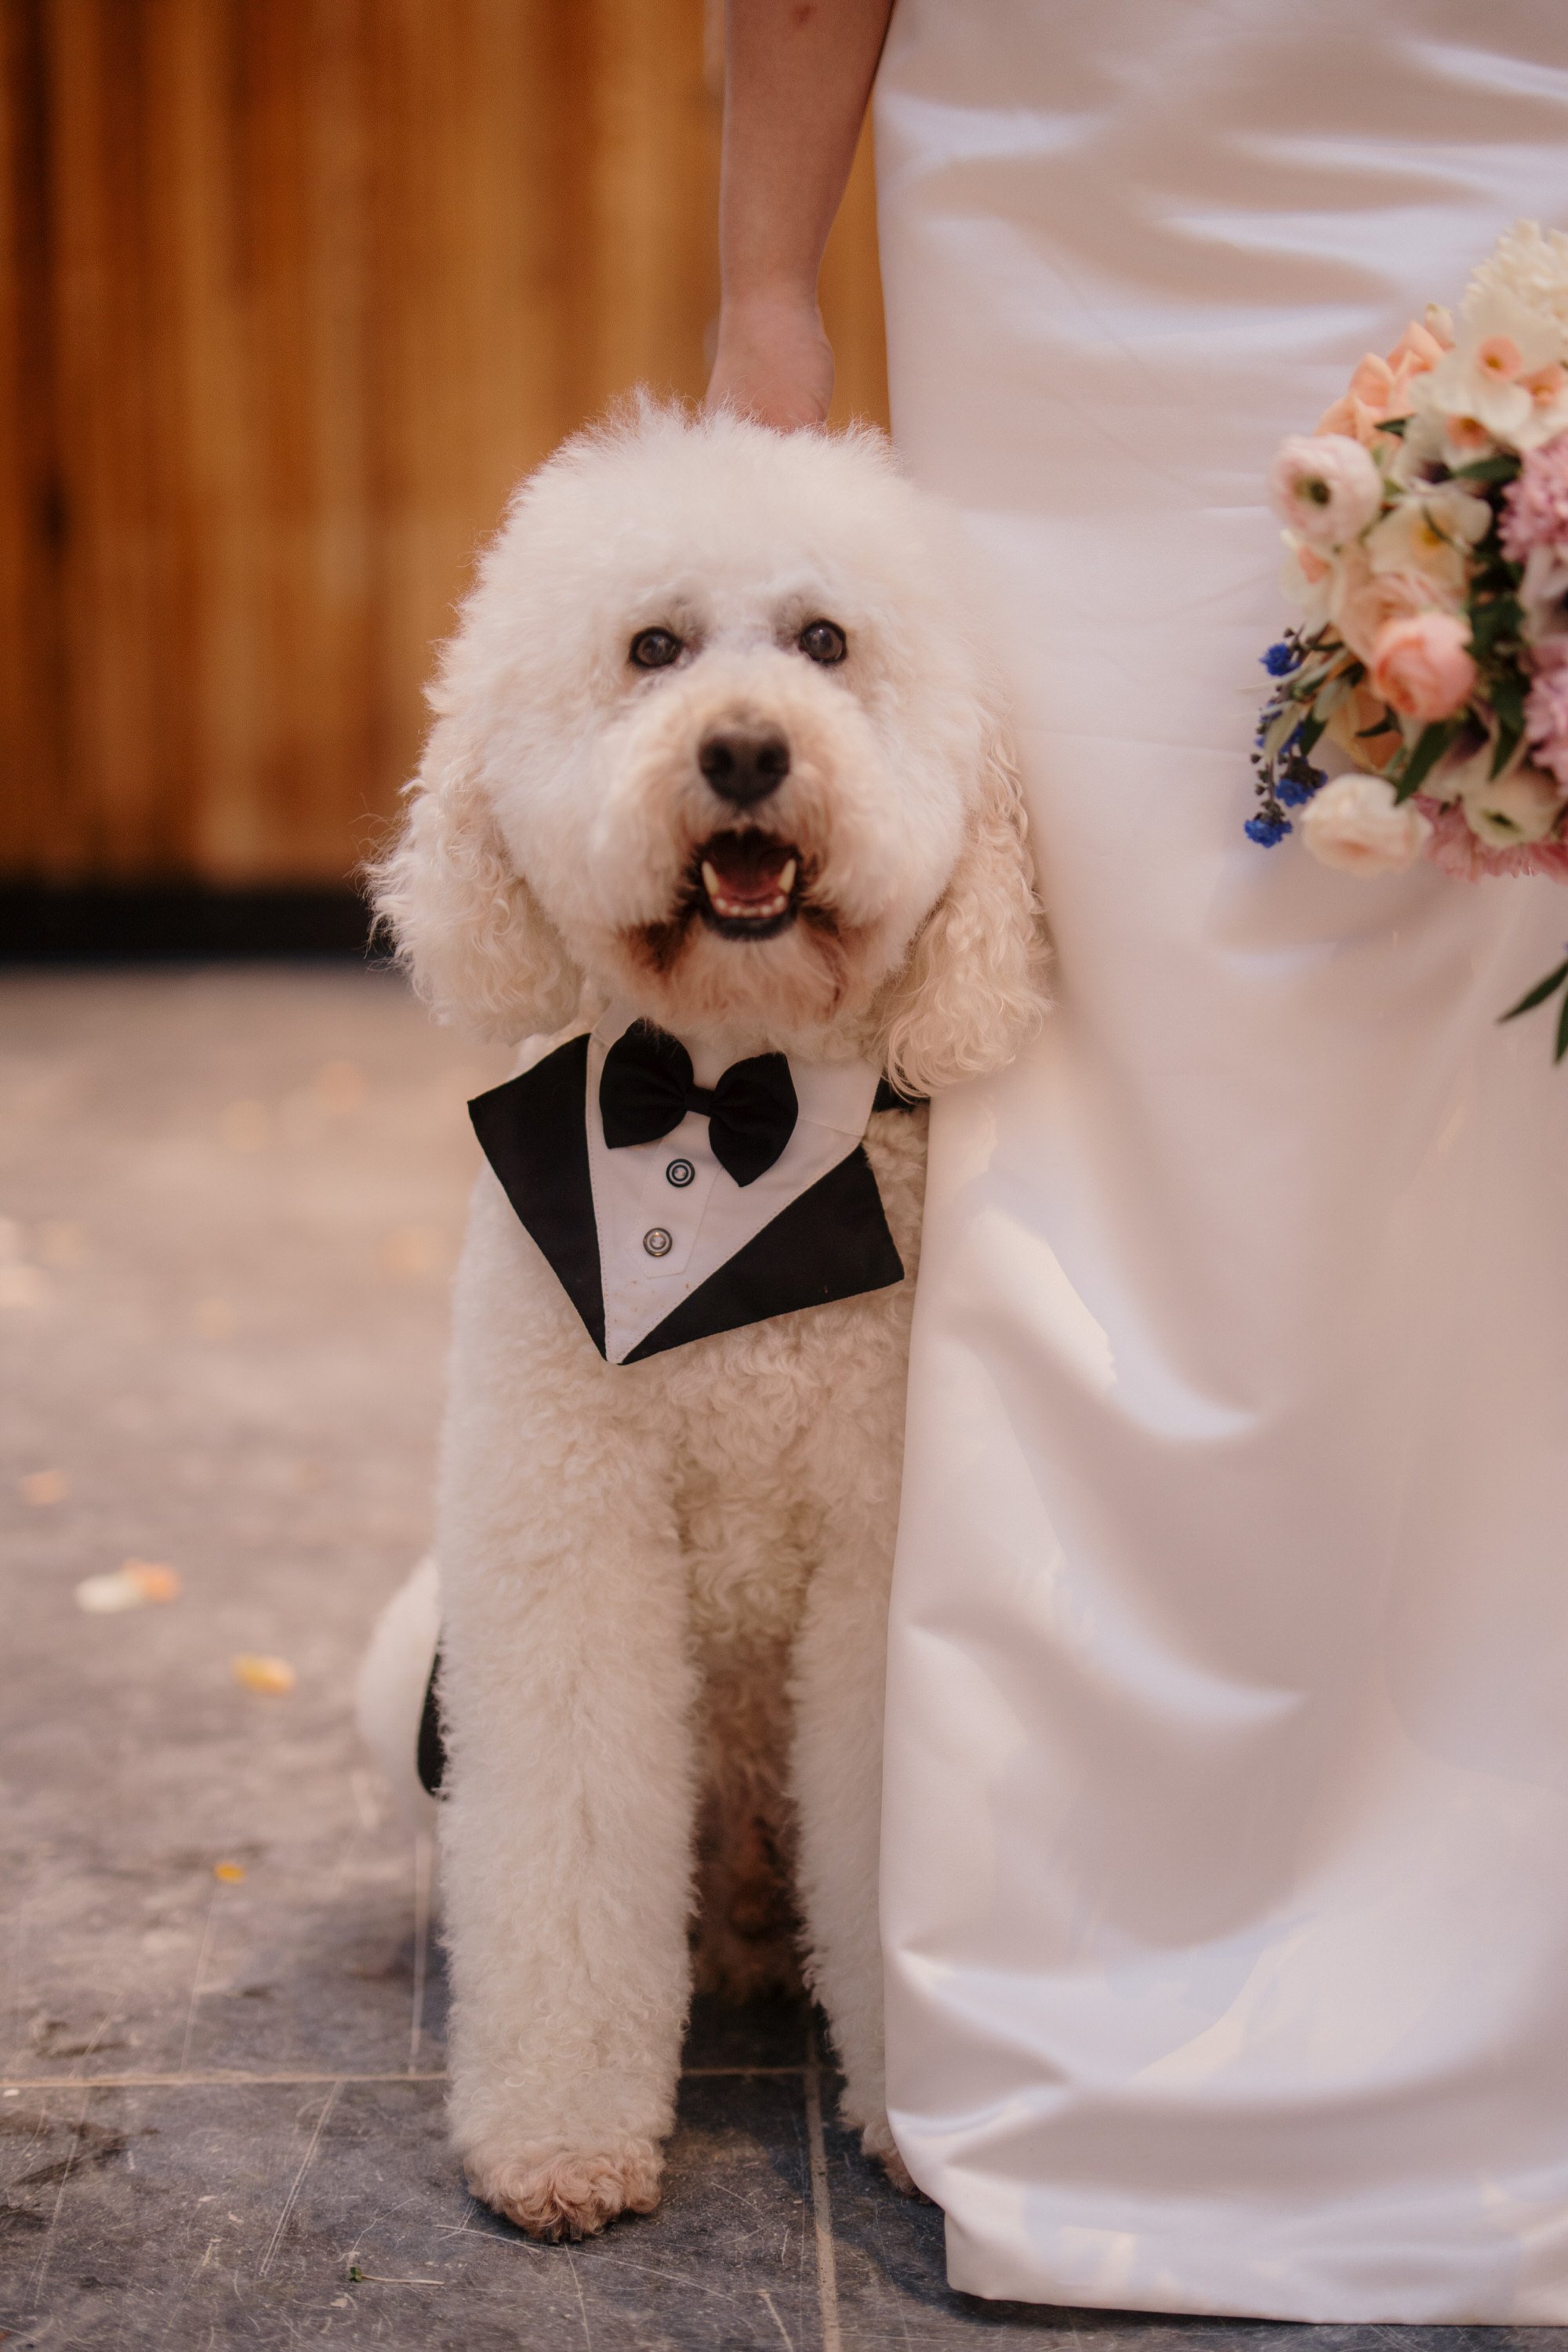 glasshouse-morningside-top-auckland-wedding-phtographer-2023-photography-videography-film-new-zealand-NZ-best-urban-venue-traditional-chinese-ceremony-spring-colourful-pet-dog-dear-white-production (63).jpg